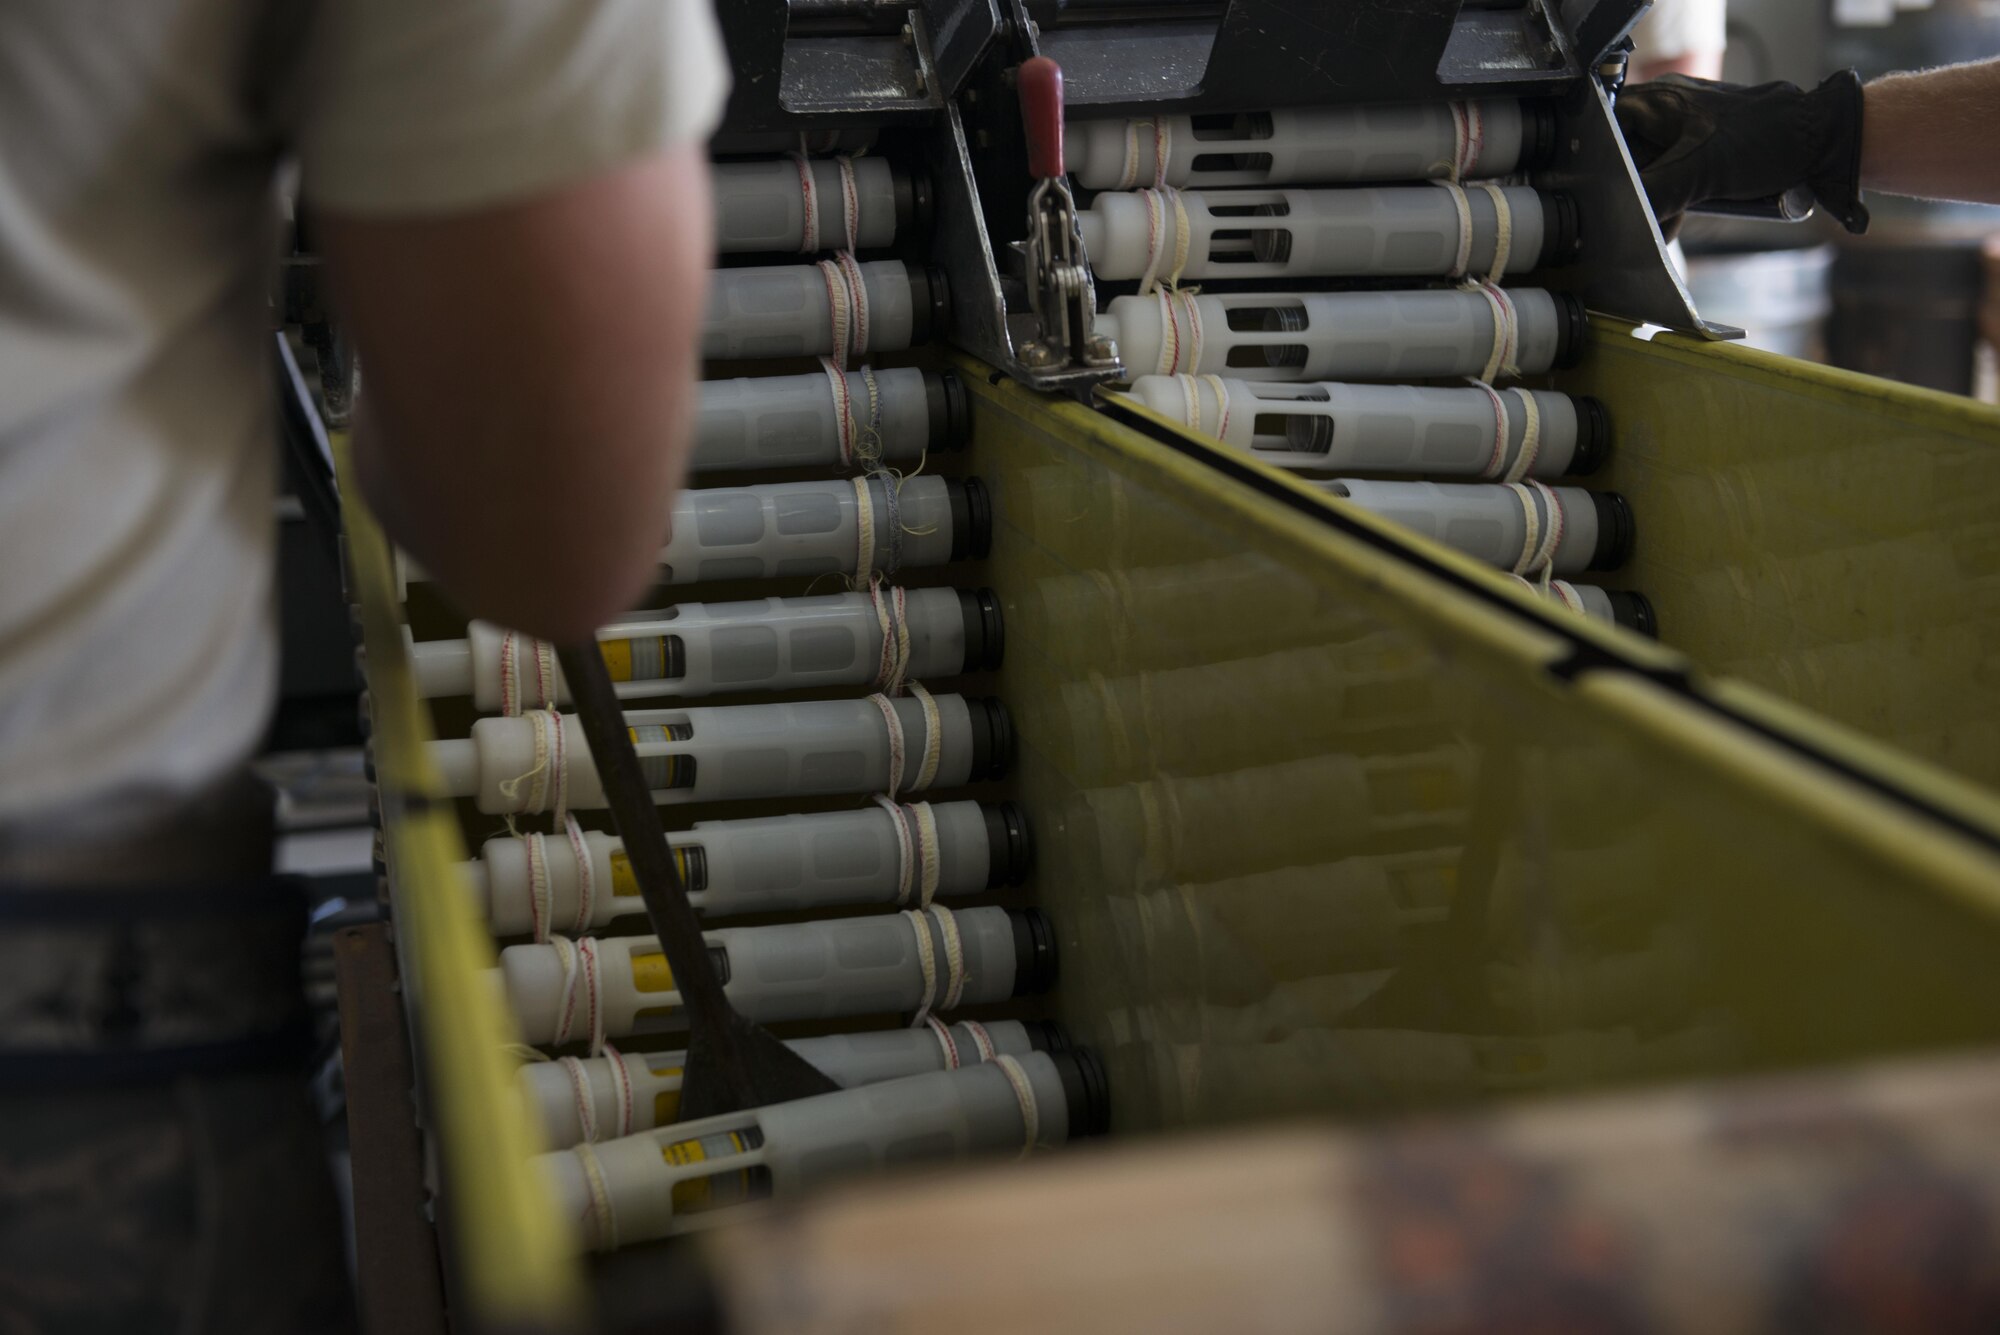 A U.S. Airman assigned to the 447th Expeditionary Aircraft Maintenance Squadron sorts 30mm rounds into a container Sept. 8, 2016, at Incirlik Air Base, Turkey. The rounds are used to supply the A-10 Thunderbolt II’s GAU-8 Avenger 30mm cannon. (U.S. Air Force photo by Senior Airman John Nieves Camacho)